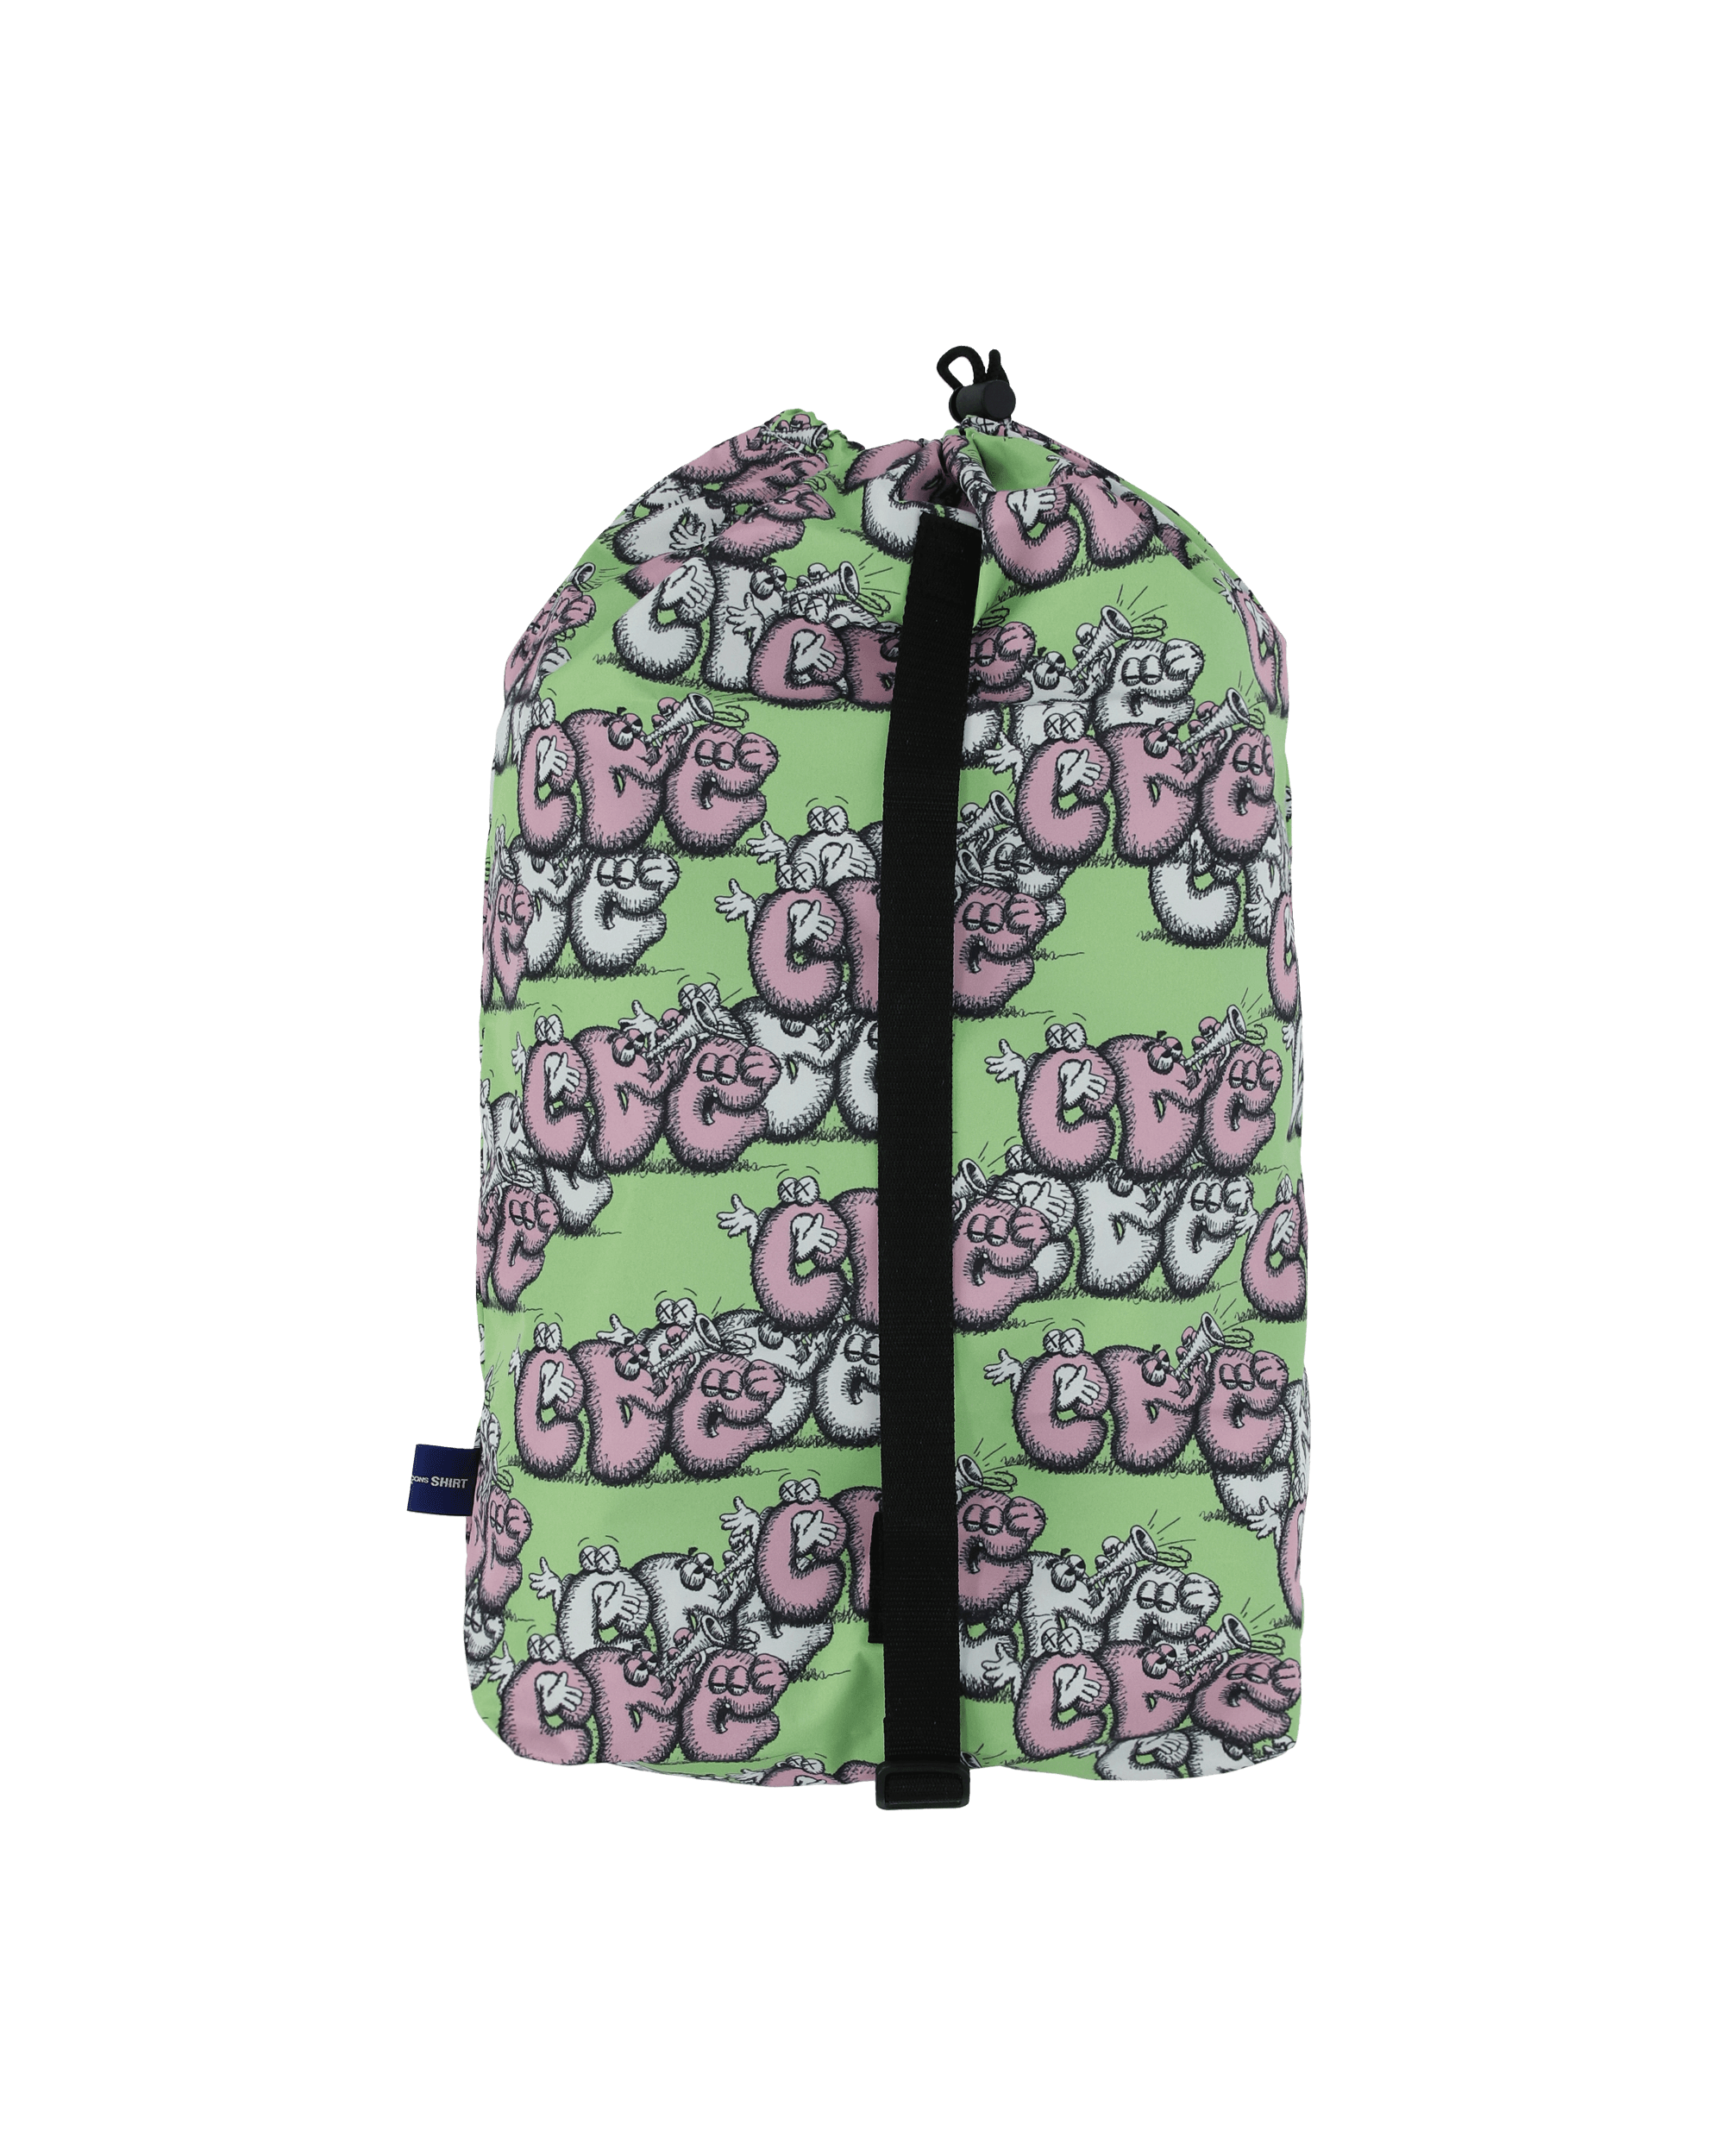 Comme Des Garcons Shirt Bag Multicolor Bags and Backpacks Travel bags FH-K201-W21 1